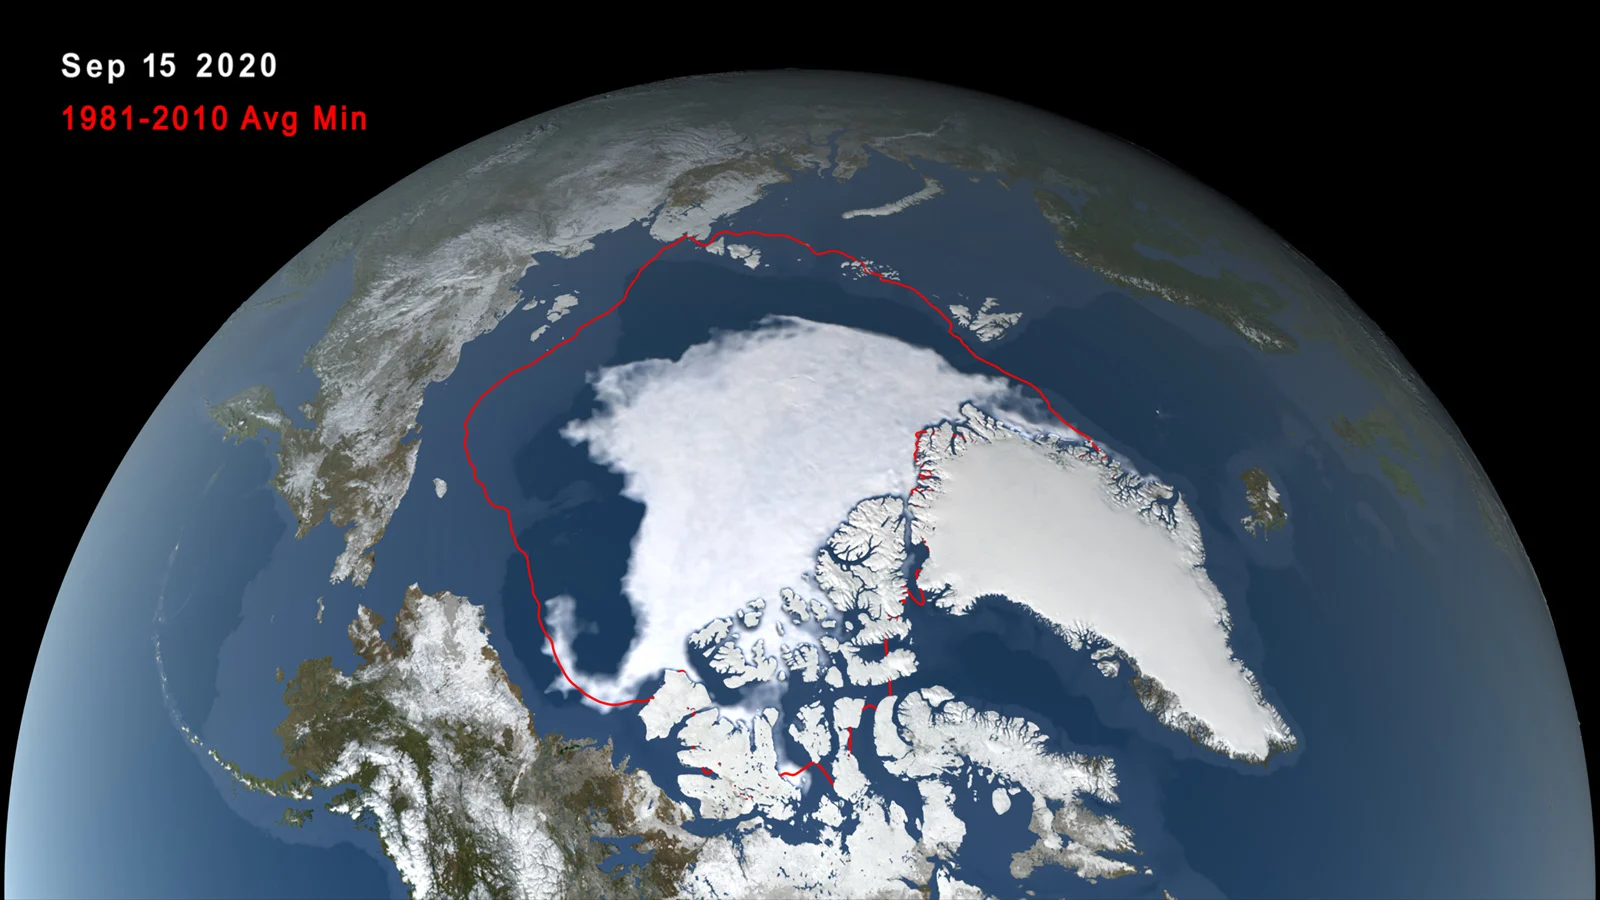 Arctic Sea Ice melts away to 2nd lowest minimum on record